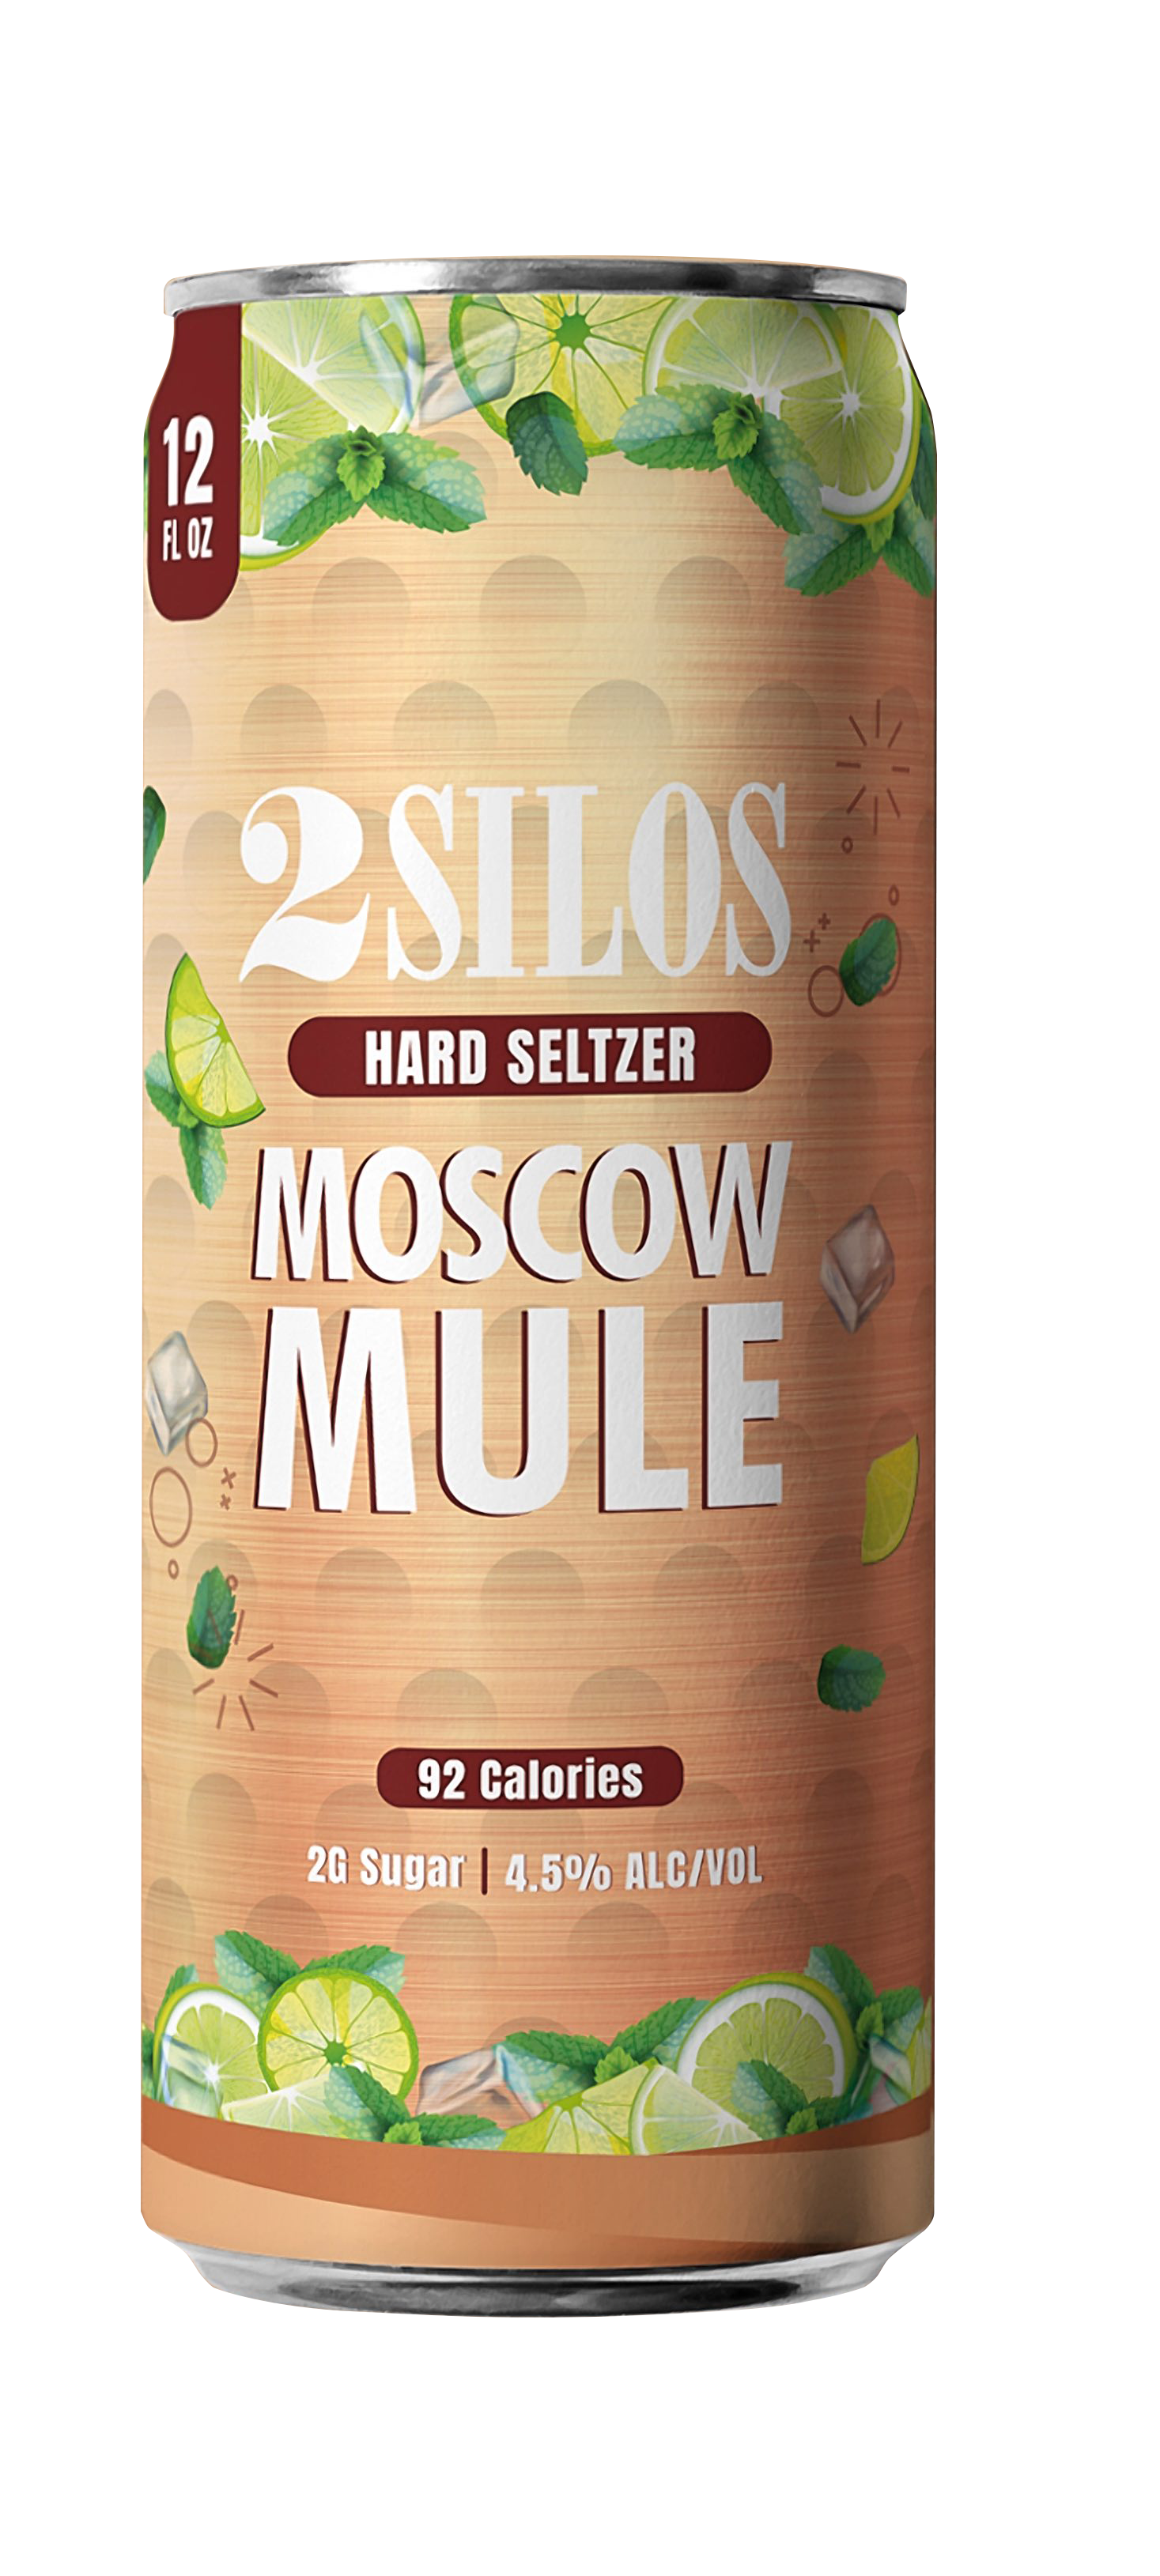 Drink 2 Silos Brewing Co. Moscow Mule Hard Seltzer